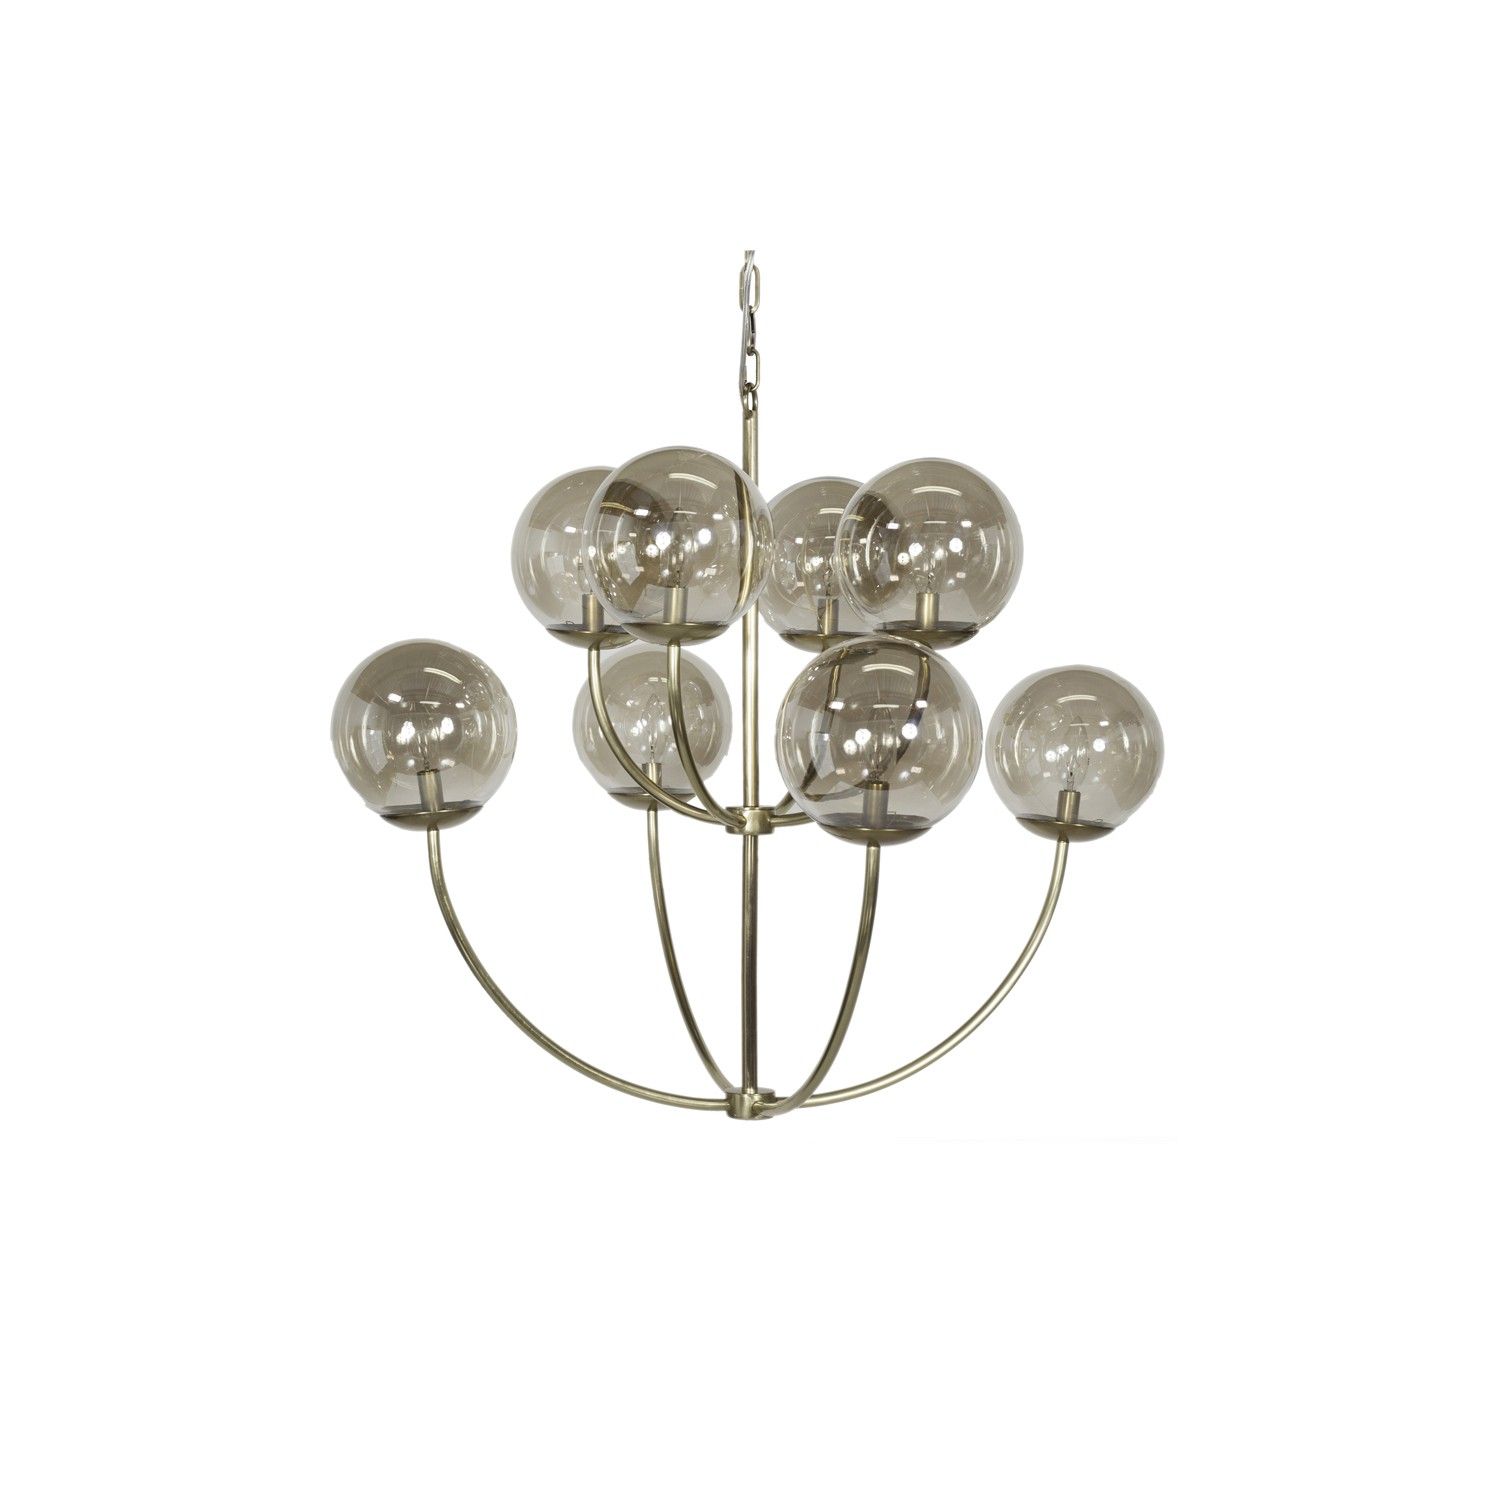 8 Arm Two Tier Chandelier with Clear Globes - Antique Brass or Nickel Option